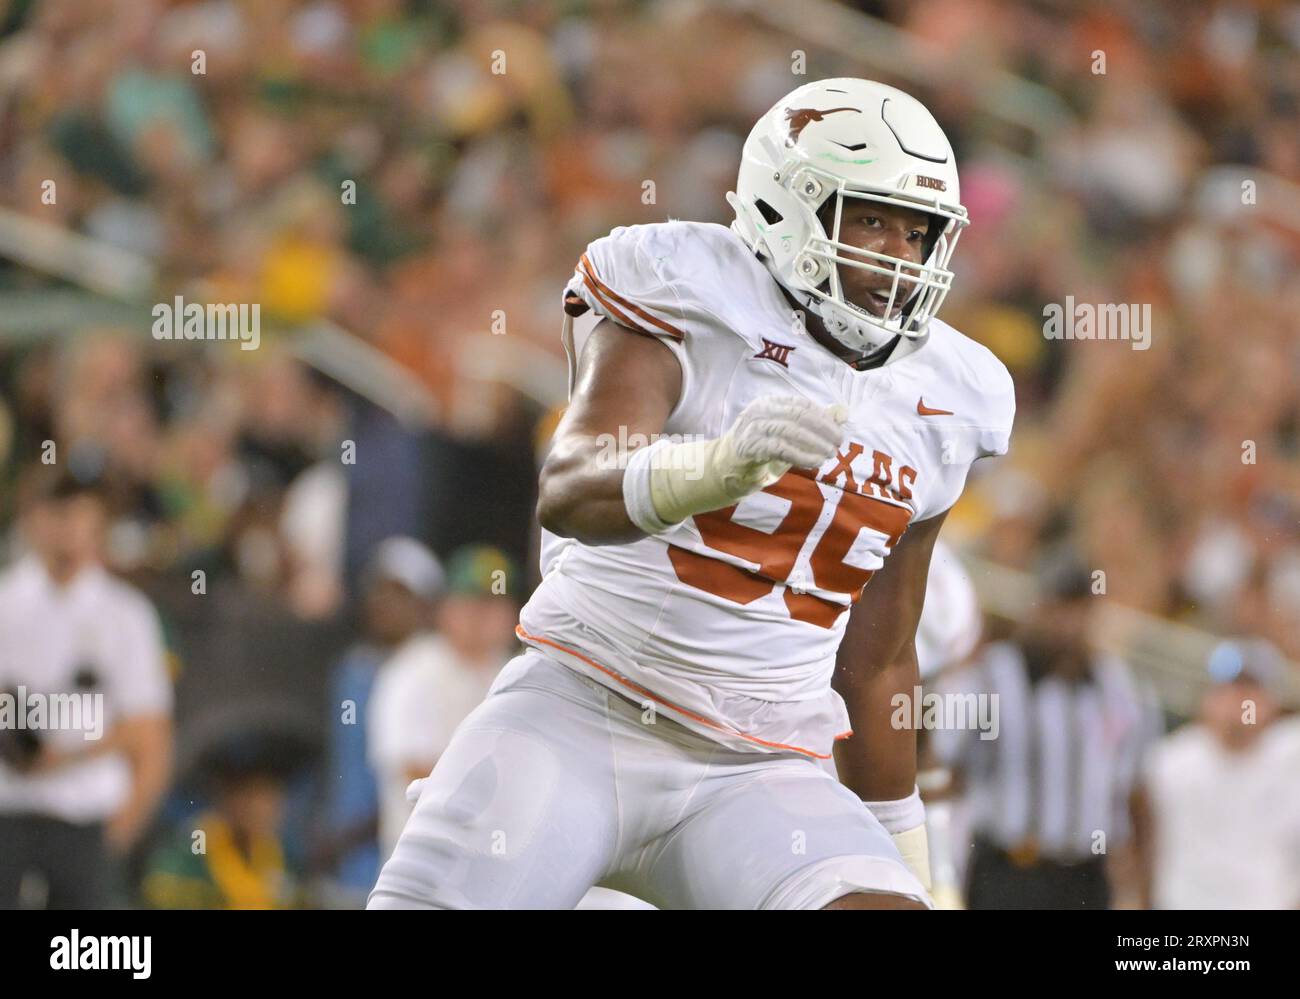 Waco, Texas, USA. 23rd Sep, 2023. Texas Longhorns defensive lineman Alfred Collins (95) rushes the quarterback during the 1st half of the NCAA Football game between the Texas Longhorns and Baylor Bears at McLane Stadium in Waco, Texas. Matthew Lynch/CSM/Alamy Live News Stock Photo